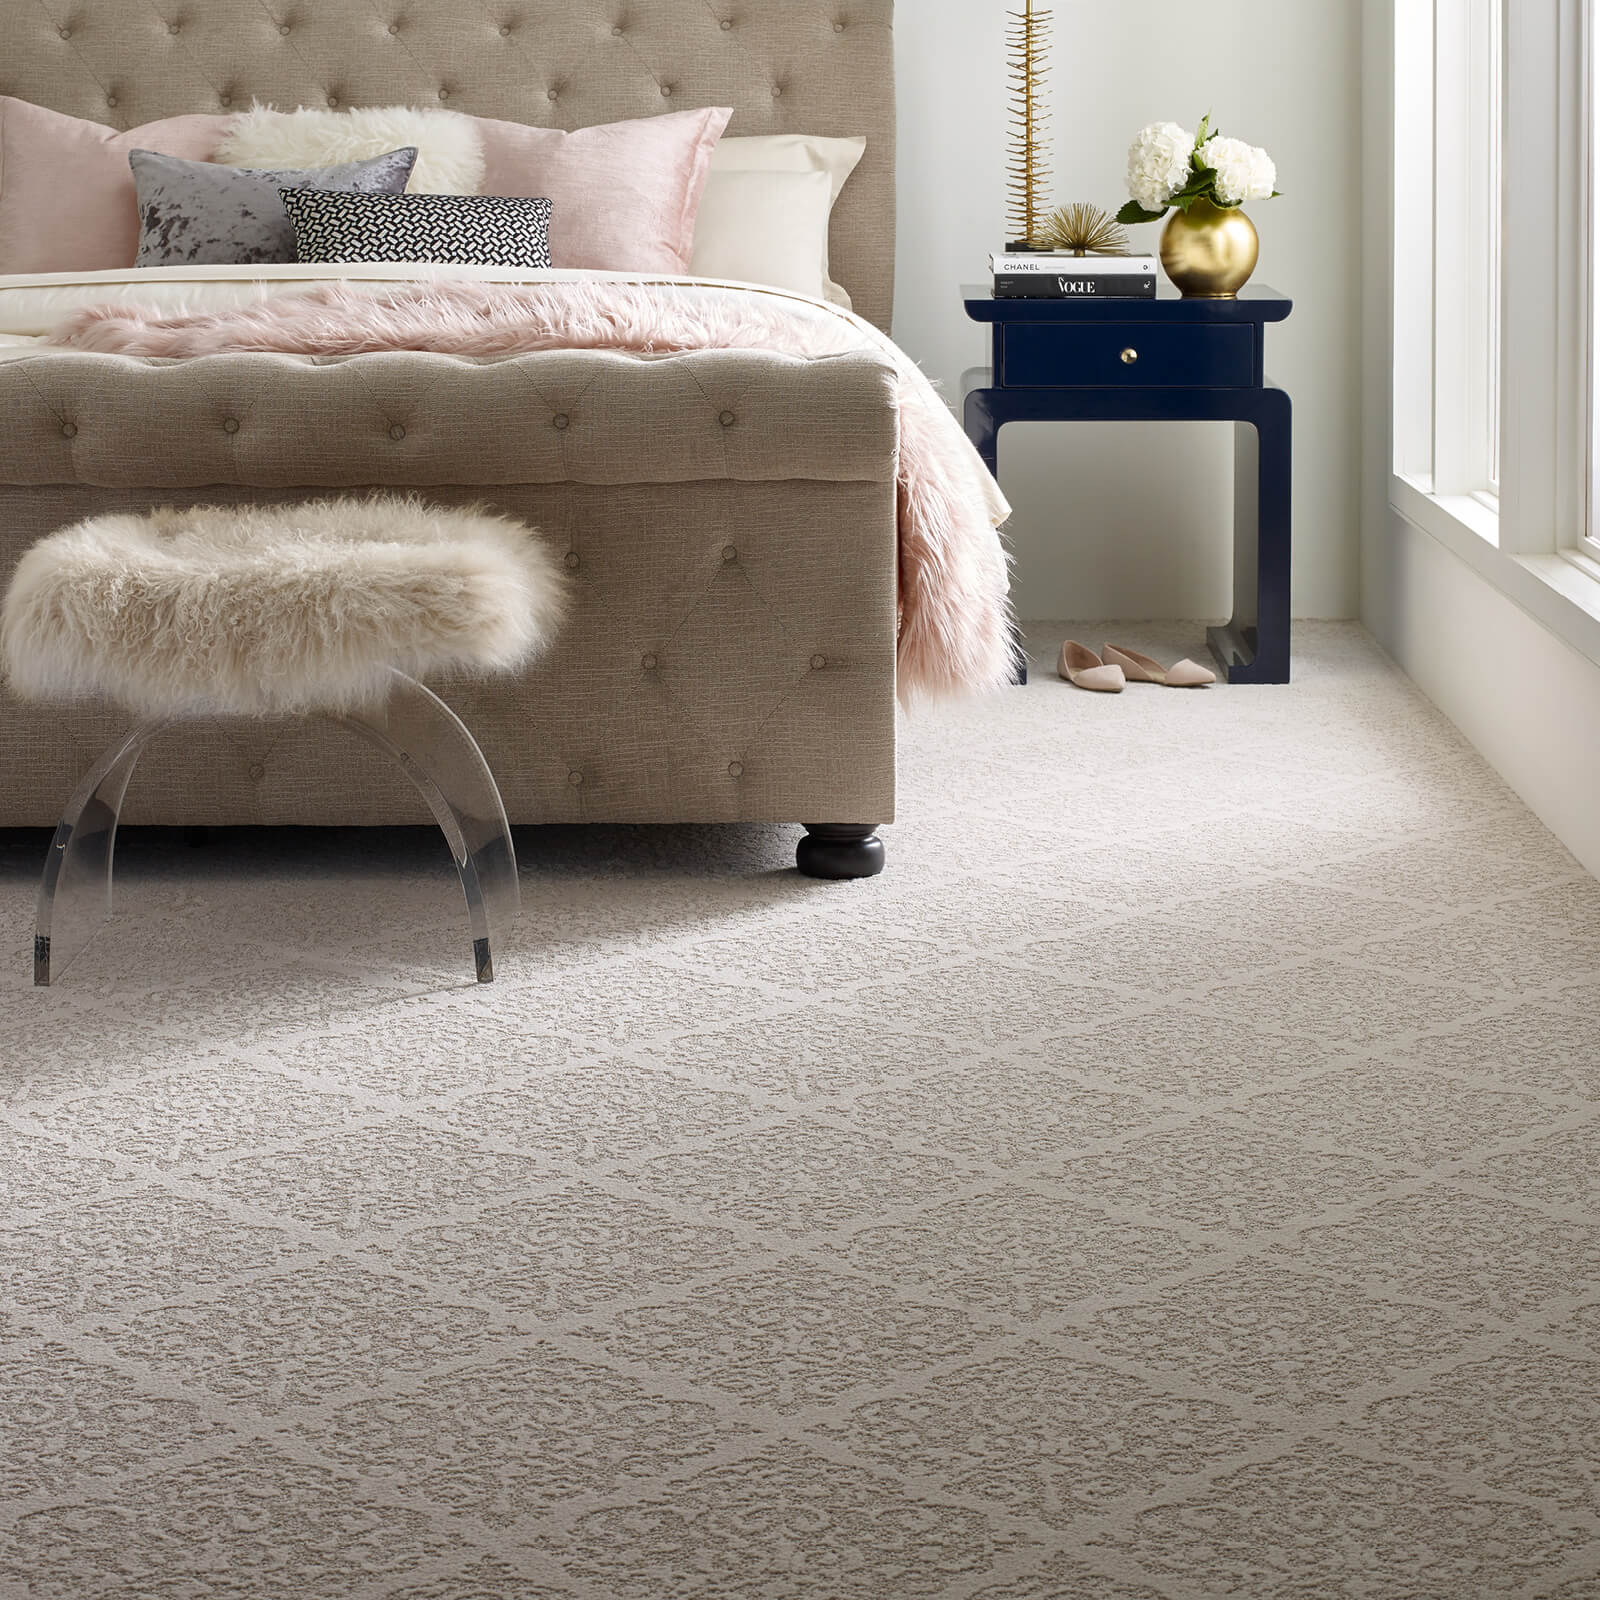 How to Keep Your Floors Warm and Cozy This Winter | Shan’s Carpets & Fine Flooring